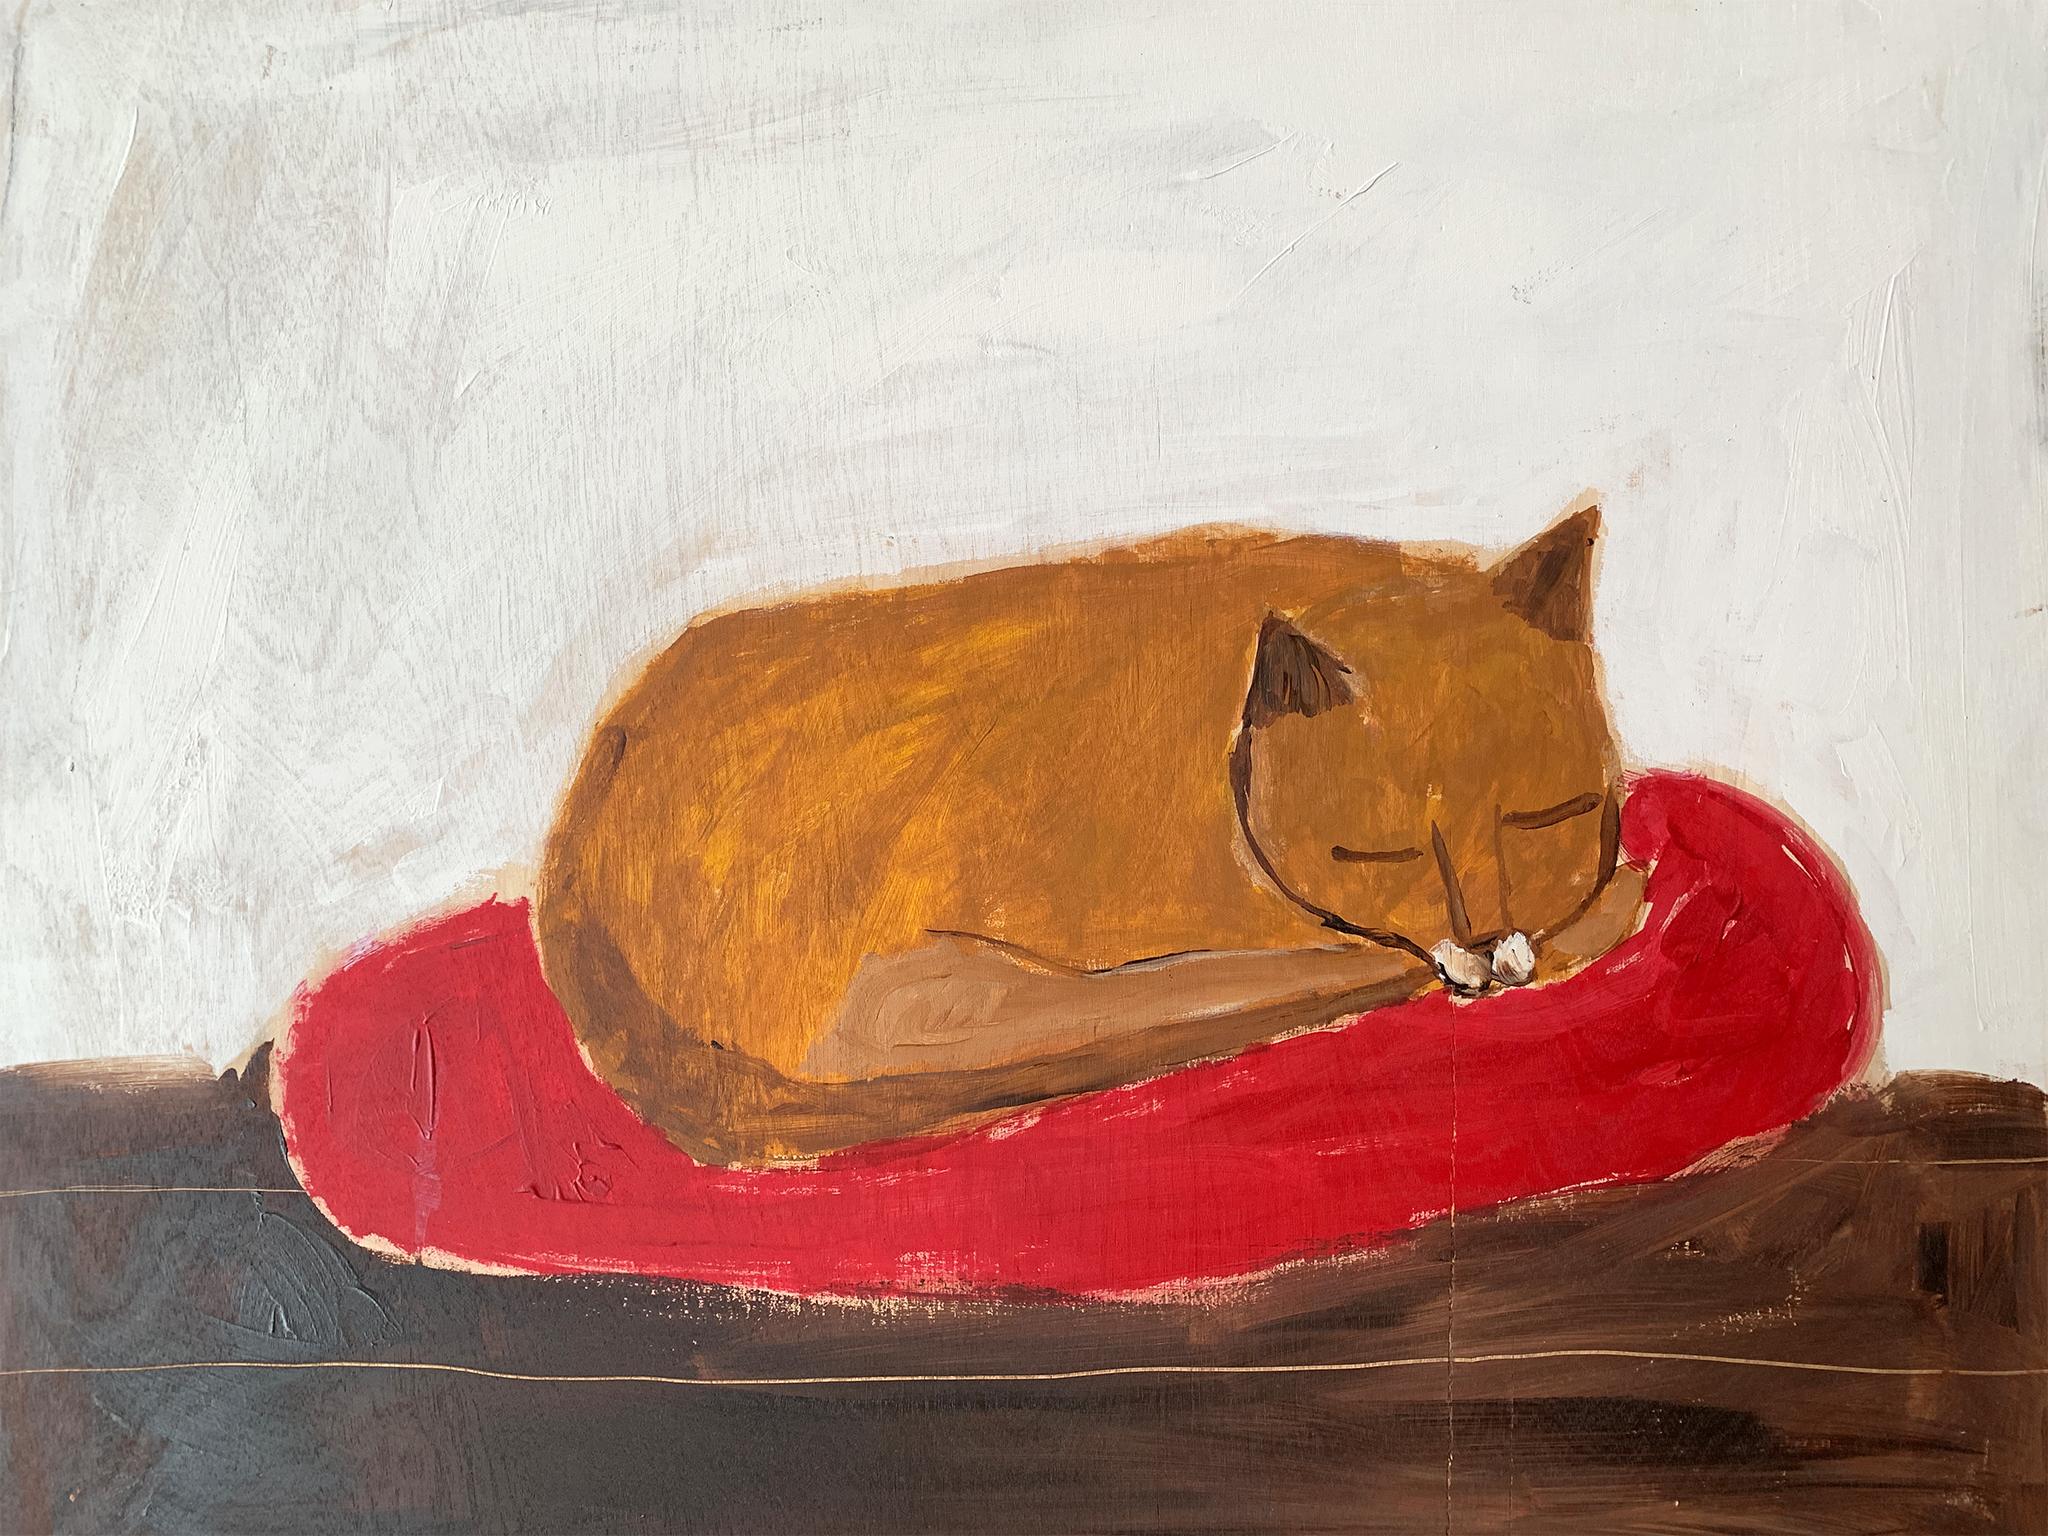 What's more adorable than this serenely sleeping cat! Painted by the late American artist Earl Swanigan. Acrylic on plywood. Signed on lower right.

Dimensions:
26 in. width
21.75 in. height
.25 in. depth

Condition notes:
In good condition.